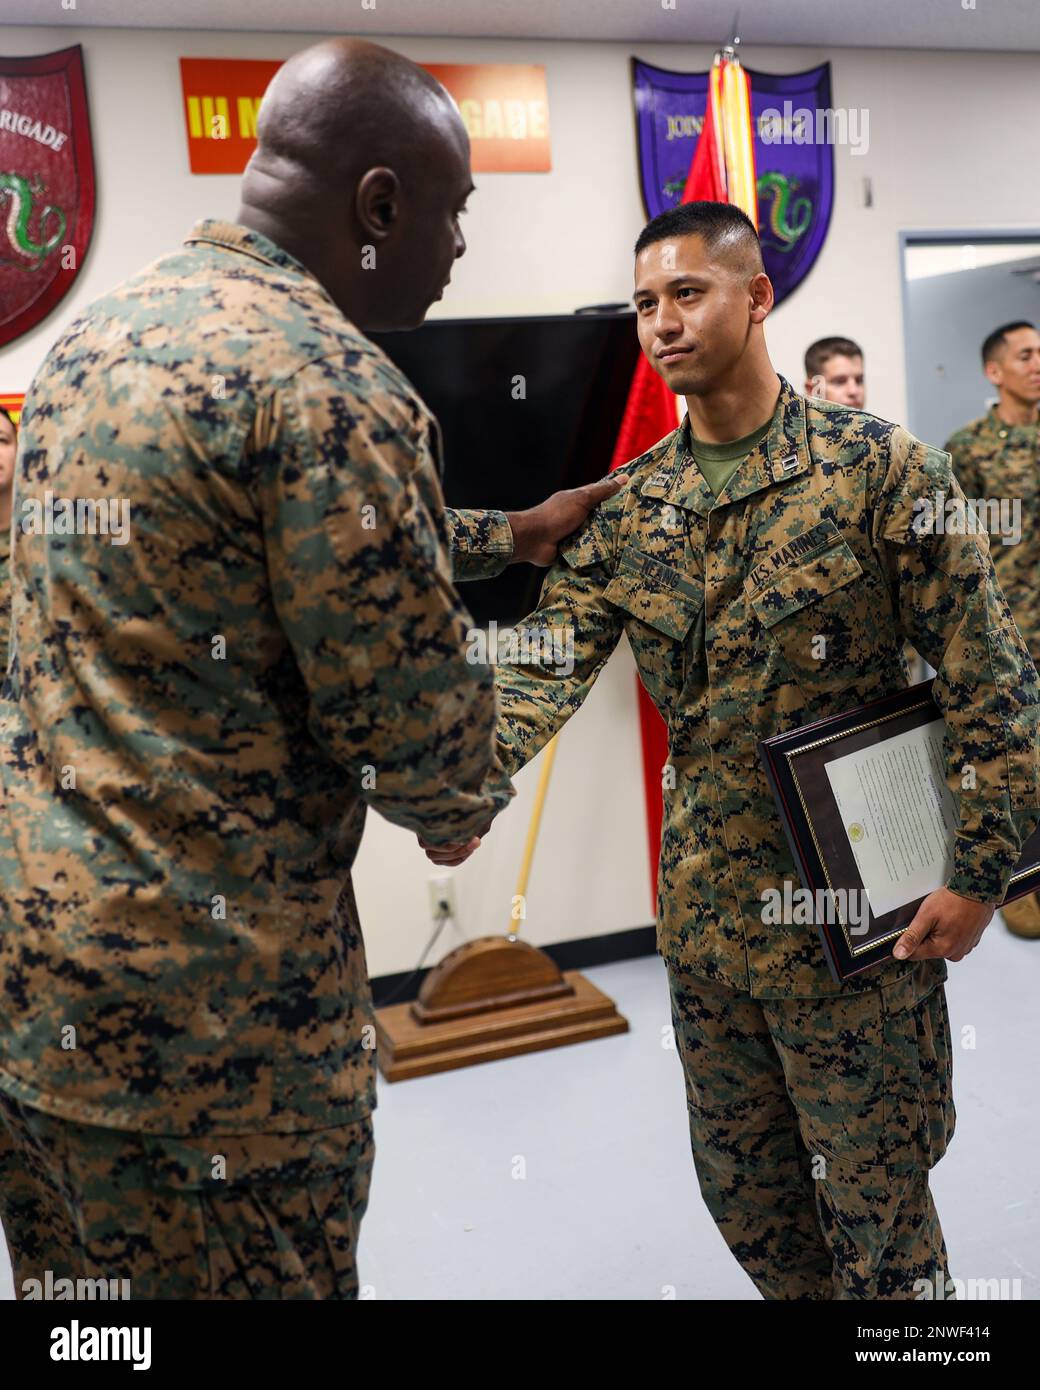 U.S. Marine Capt. Naro Neang, a military police officer with 3rd Marine Expeditionary Brigade, III Marine Expeditionary Force, is congratulated by Maj. Jeff Adusei, current operations officer, 3rd MEB, at Neang's promotion ceremony aboard Camp Courtney, Okinawa, Japan, Feb. 6, 2023. Neang, a native of Modesto, Calif., was commissioned as an officer in the Marine Corps on July 28, 2018, and reported to 3rd MEB on May 5, 2022. He currently serves as the anti-terrorism and force protection officer. Stock Photo